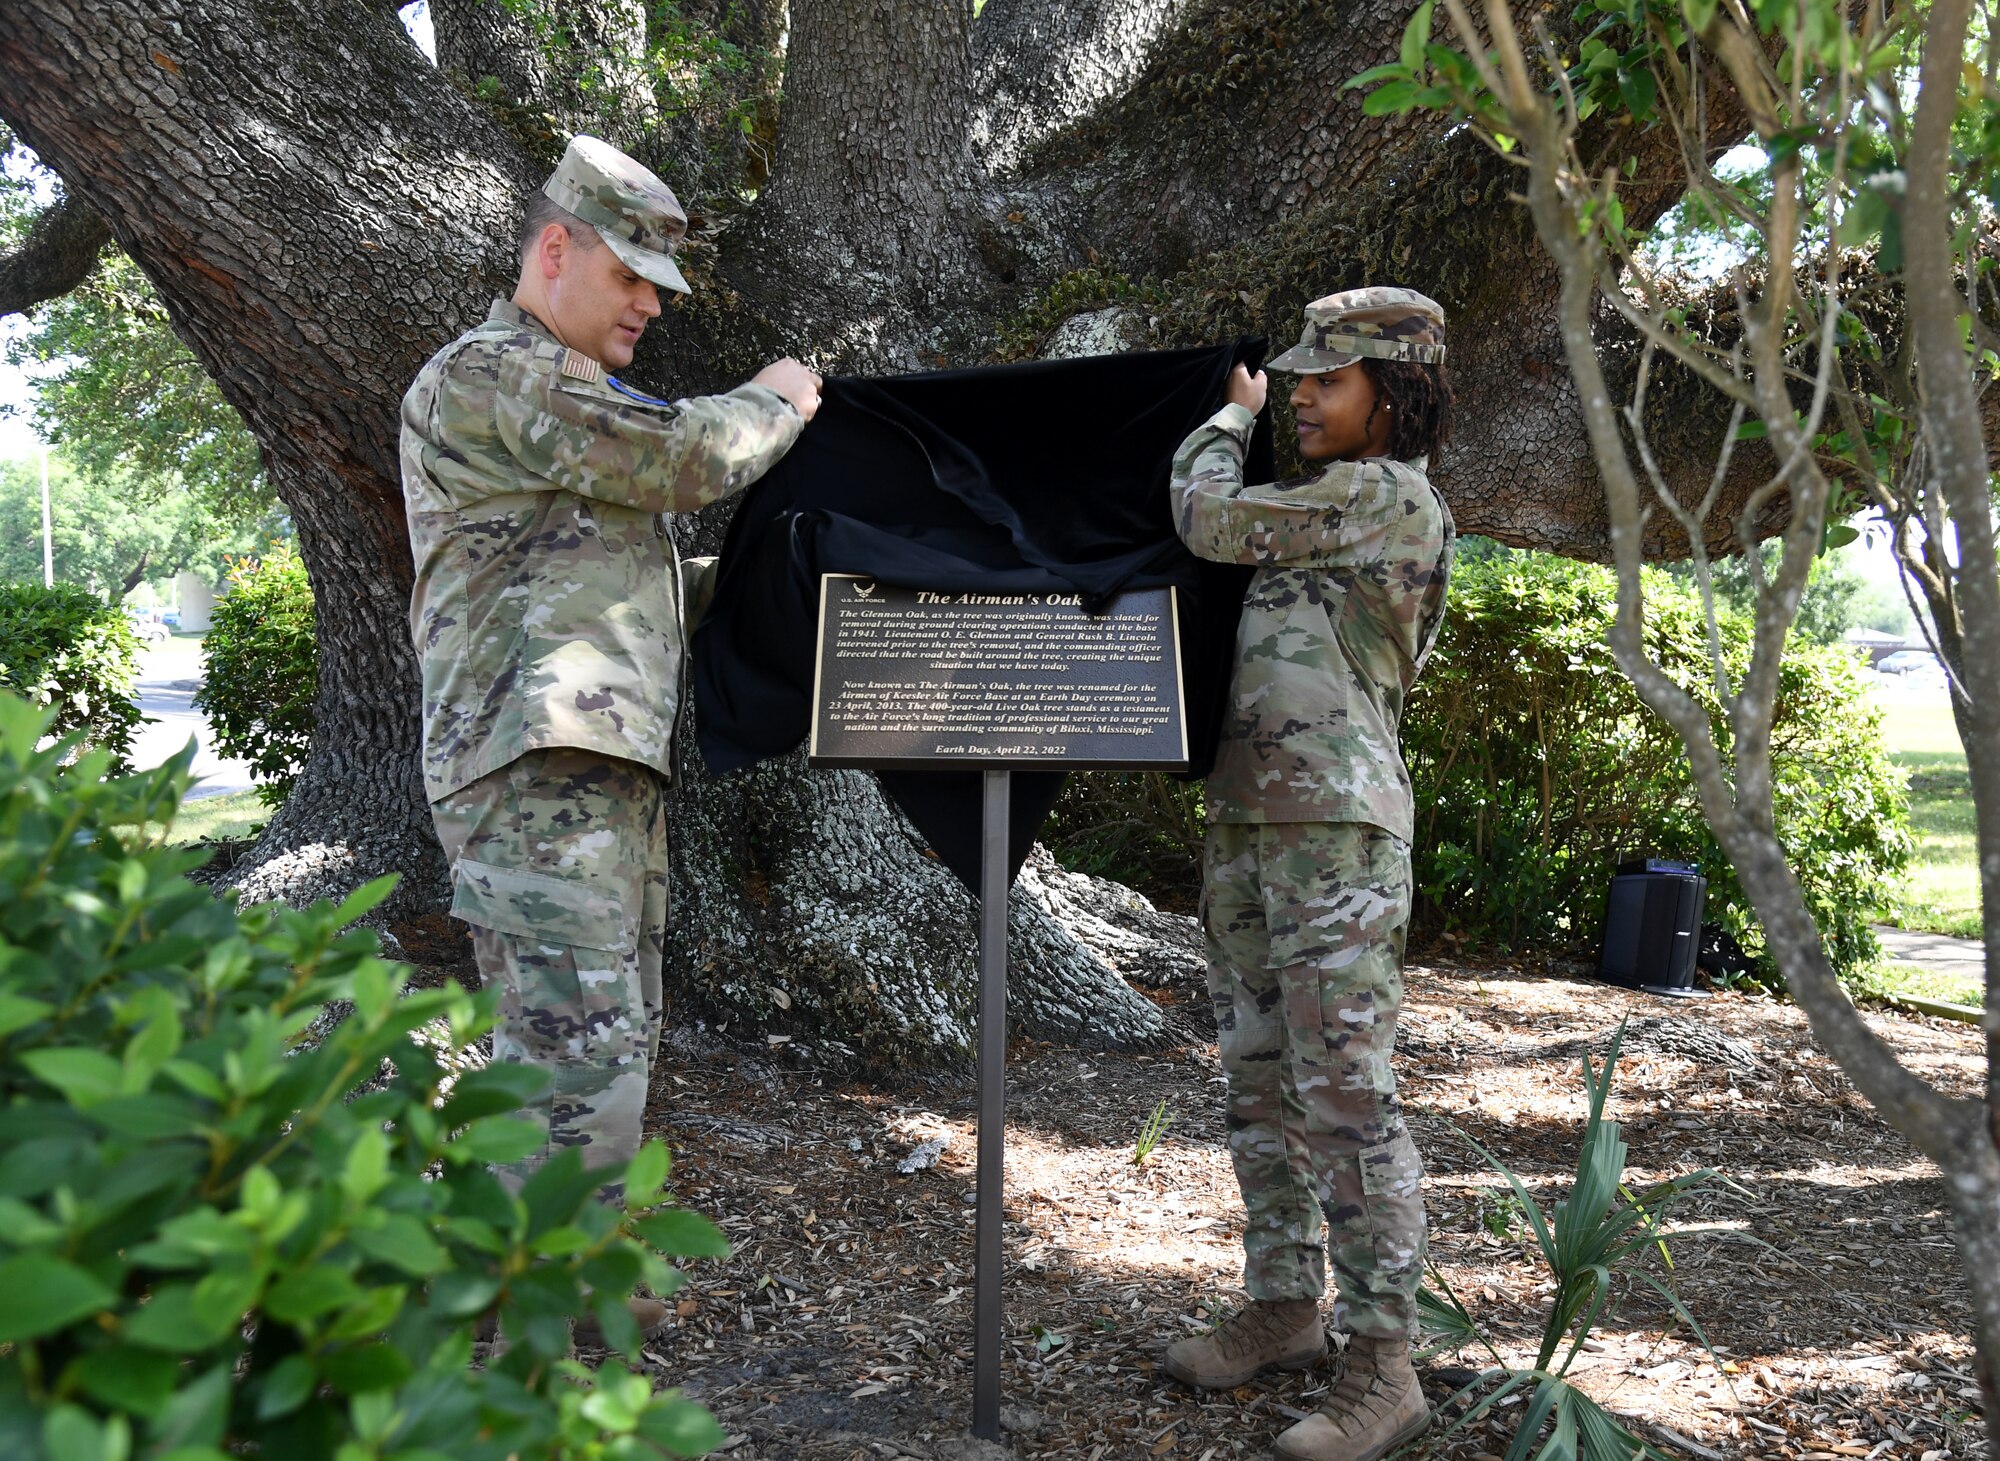 U.S. Air Force Col. James Kafer, 81st Training Wing vice commander, and Senior Airman Kaylahn Dargan-Williams, 81st Logistics Readiness Squadron logistics planner, unveil the Earth Day Airman's Oak Plaque during a ceremony at Keesler Air Force Base, Mississippi, April 22, 2022. The plaque was unveiled during the event to celebrate Earth Day, with this year's theme being “Invest in Our Planet." (U.S. Air Force photo by Kemberly Groue)